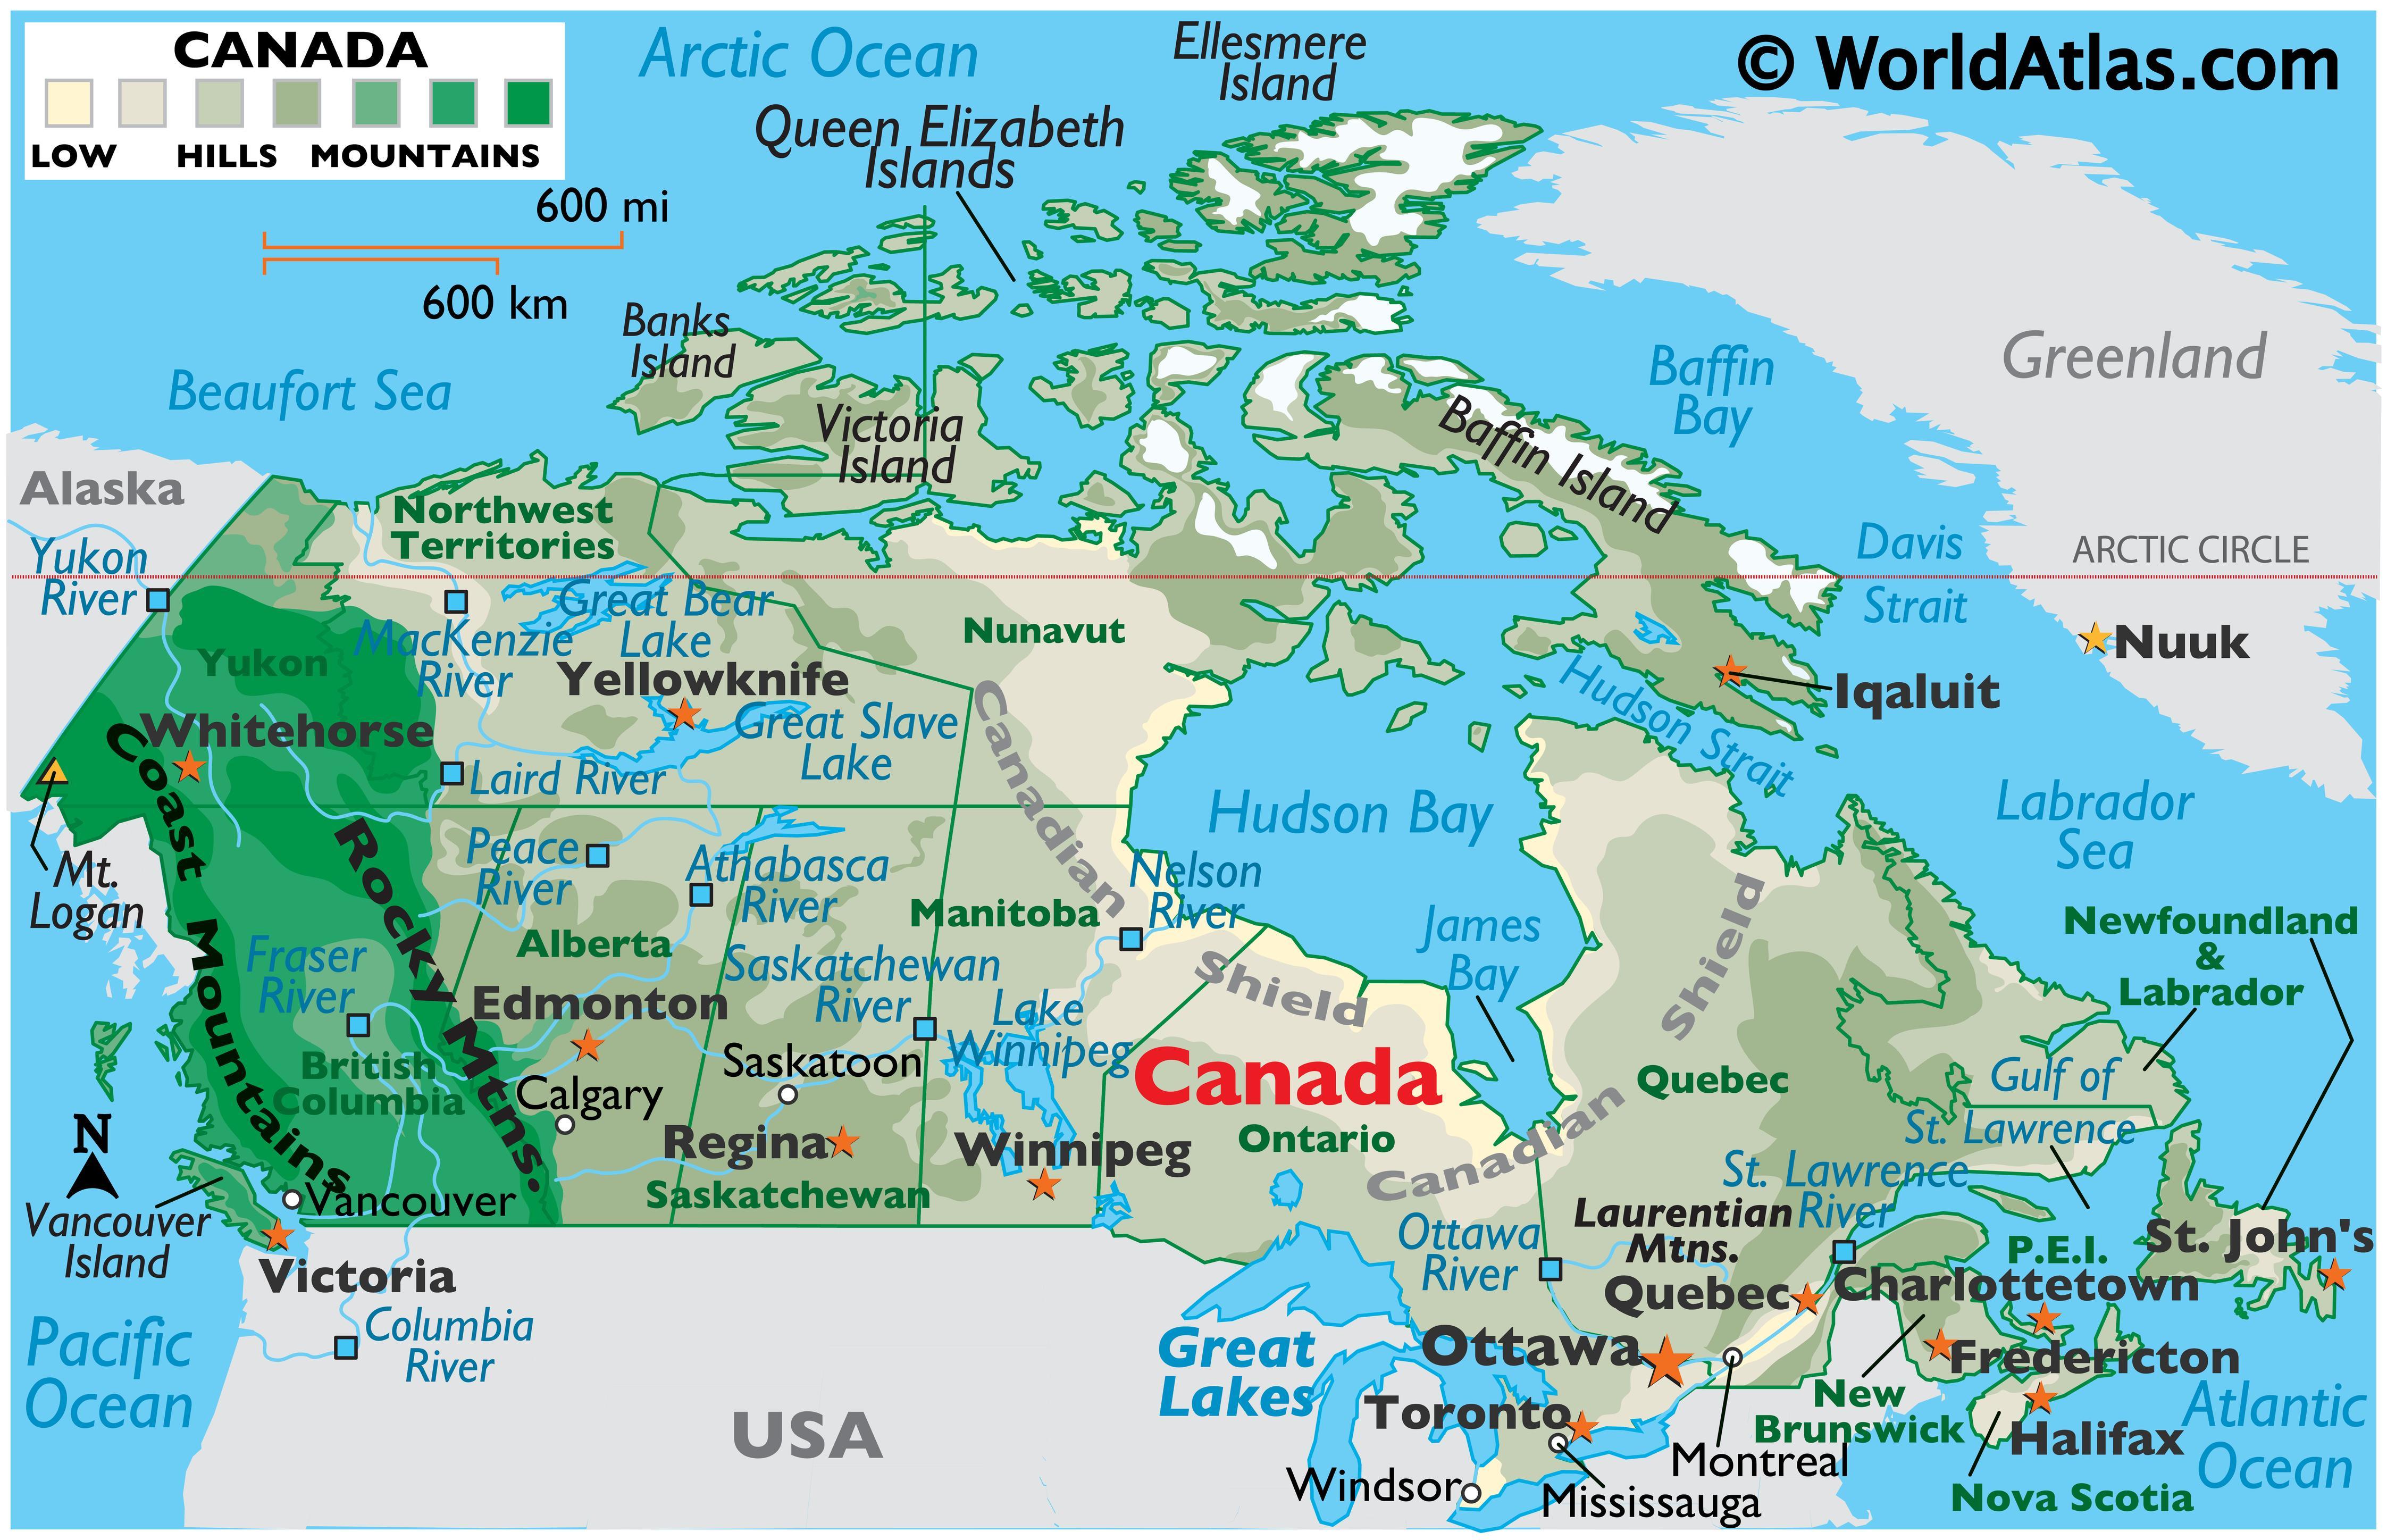  /><br /><br/><p>Canada Full Map</p></center></center>
<div style='clear: both;'></div>
</div>
<div class='post-footer'>
<div class='post-footer-line post-footer-line-1'>
<div style=